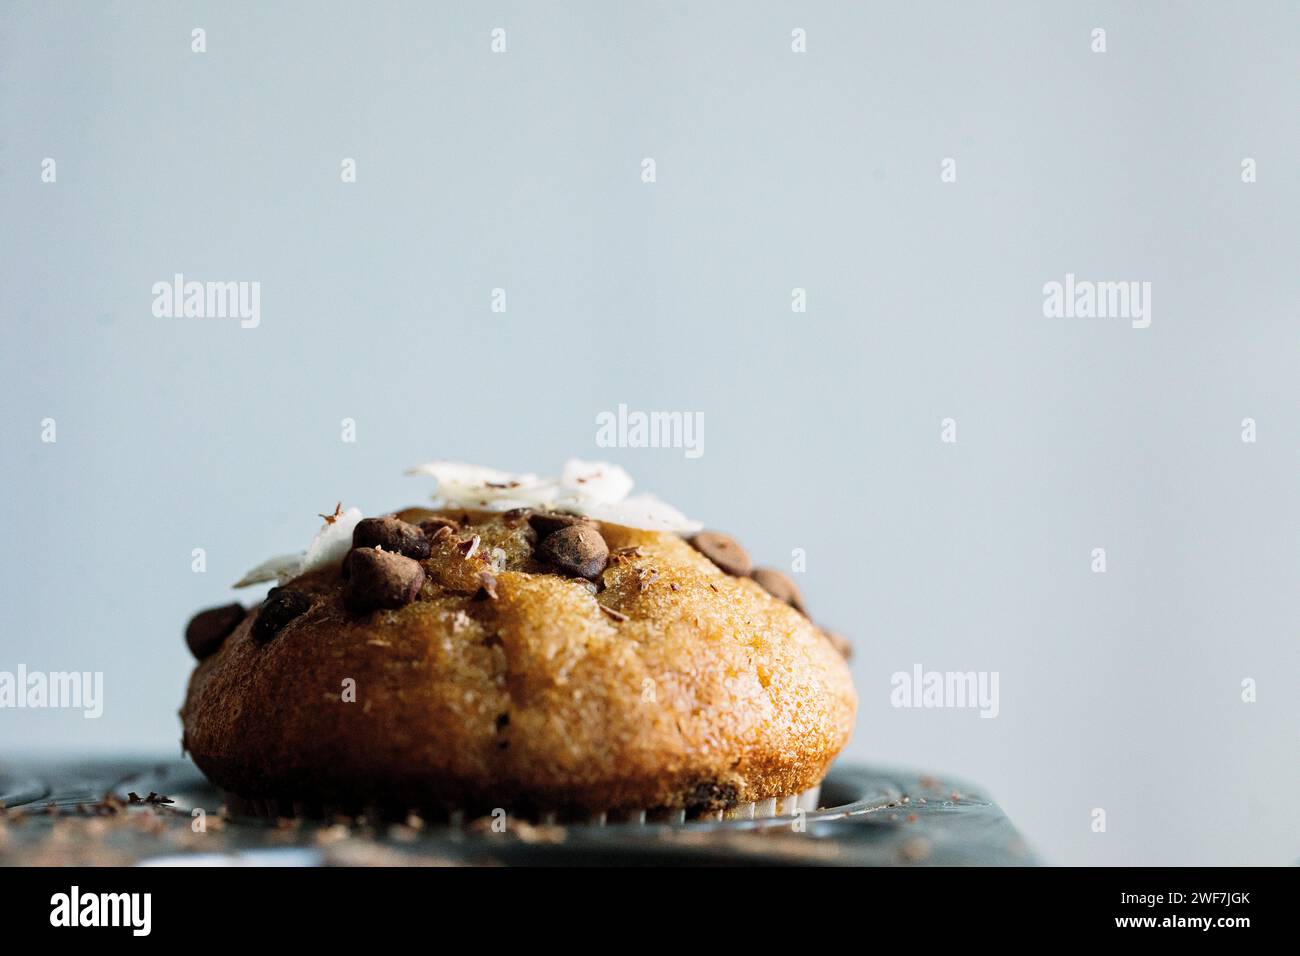 A close up of a muffin with a plain white background Stock Photo